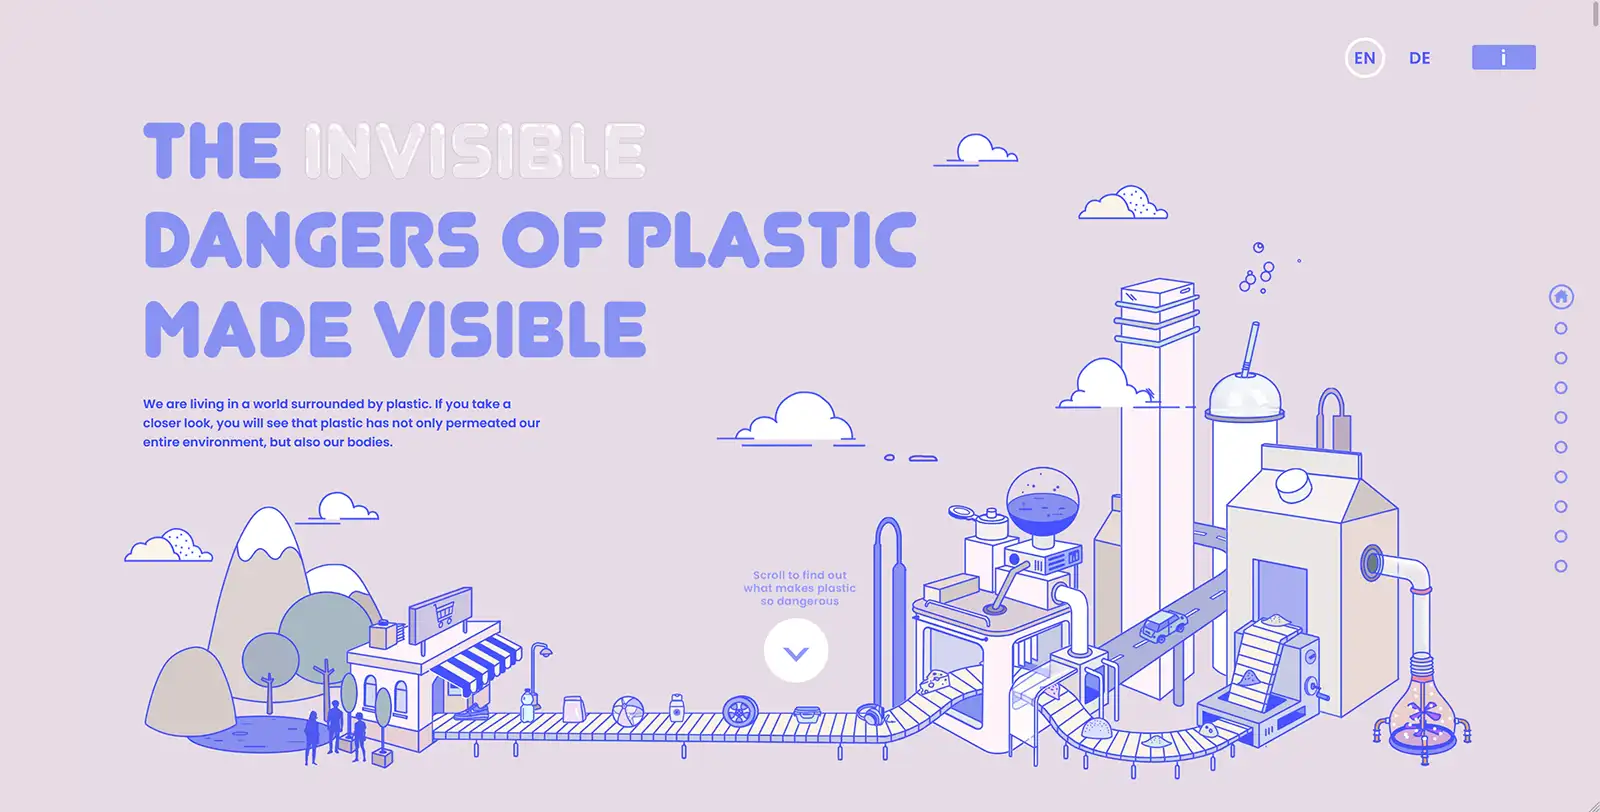 »The invisible dangers of plastic made visible«